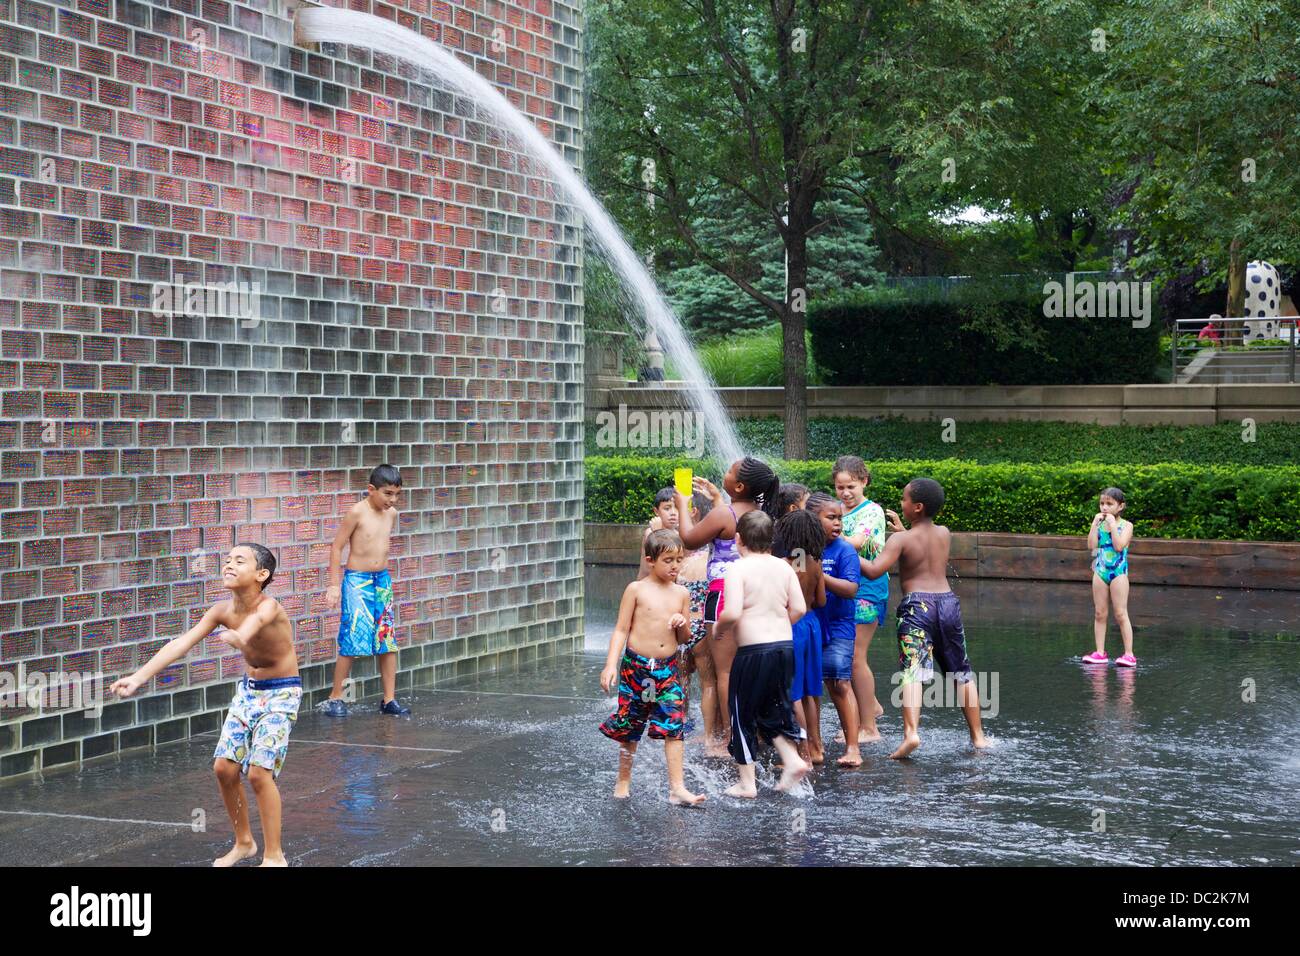 Chicago, Illinois, USA. 7th August 2013. Crown Fountain in Millennium Park in Chicago, USA, provides cool fun for children on a hot, muggy day. Credit:  Todd Bannor/Alamy Live News Stock Photo